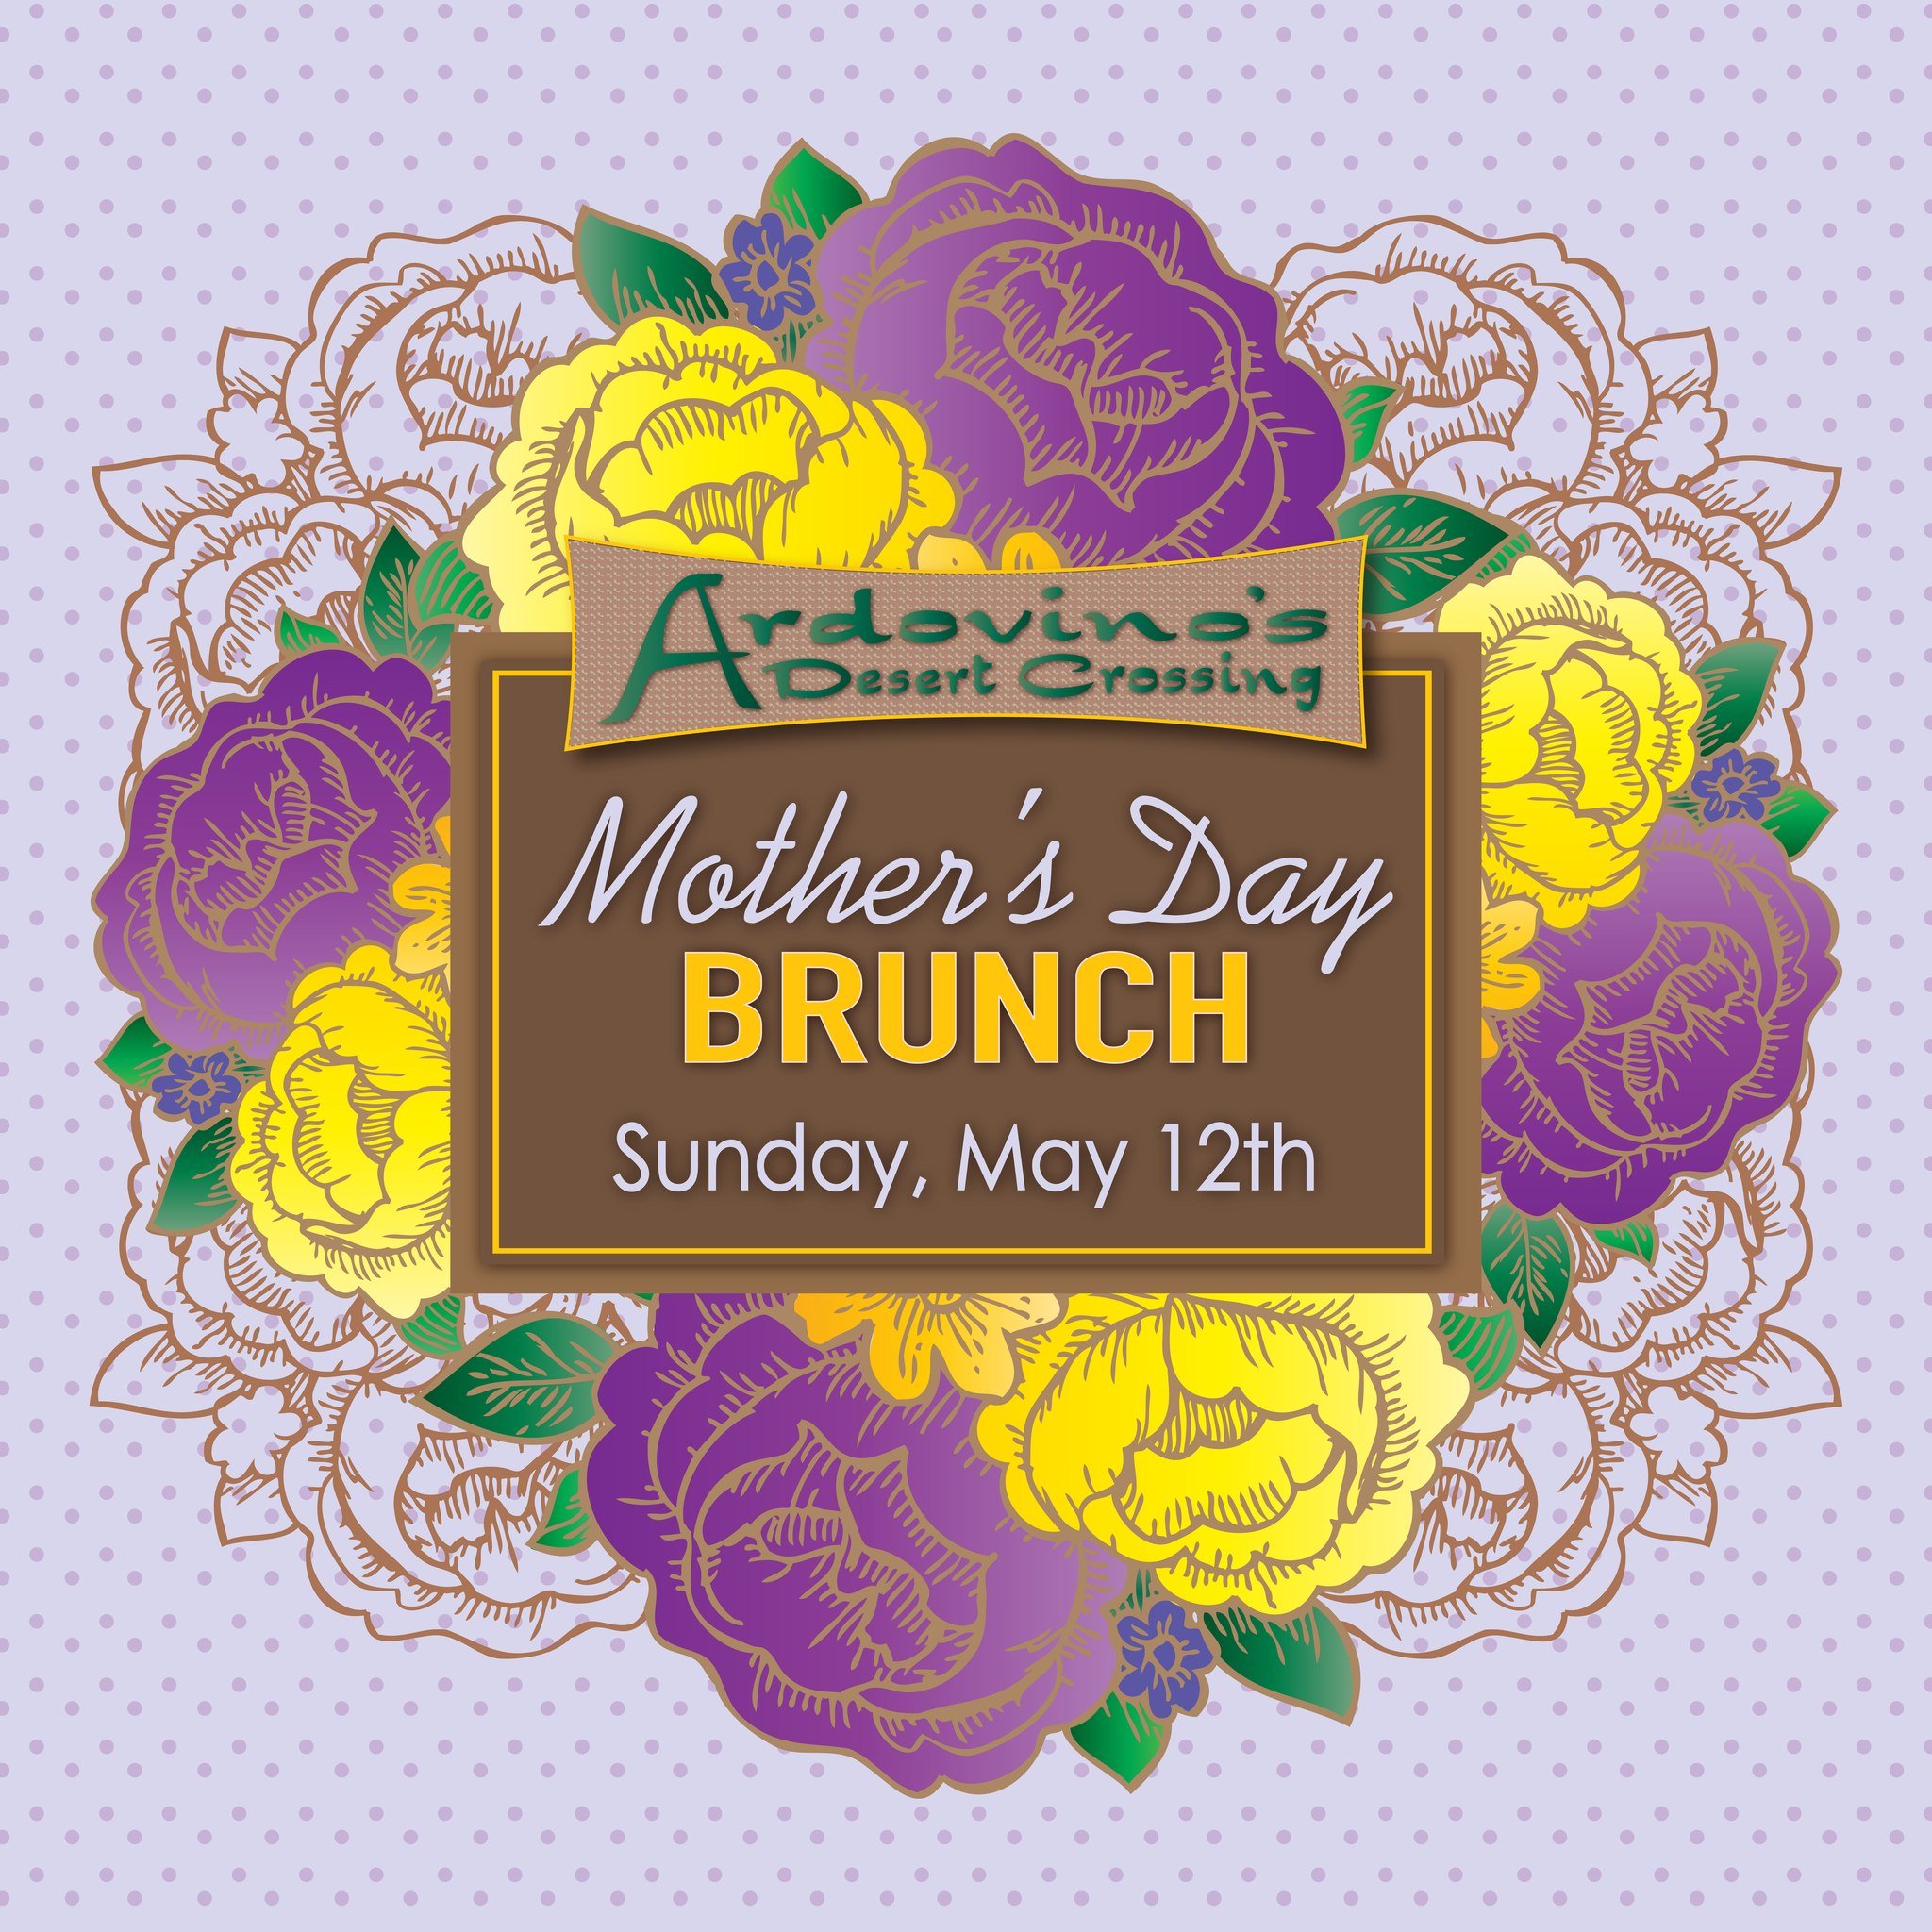 Reservations can now be made at 575-589-0653 ext. 6. CC information required for all reservations. First seating is at 9:30AM.

www.ardovinos.com/mothers-day or the link in our BIO